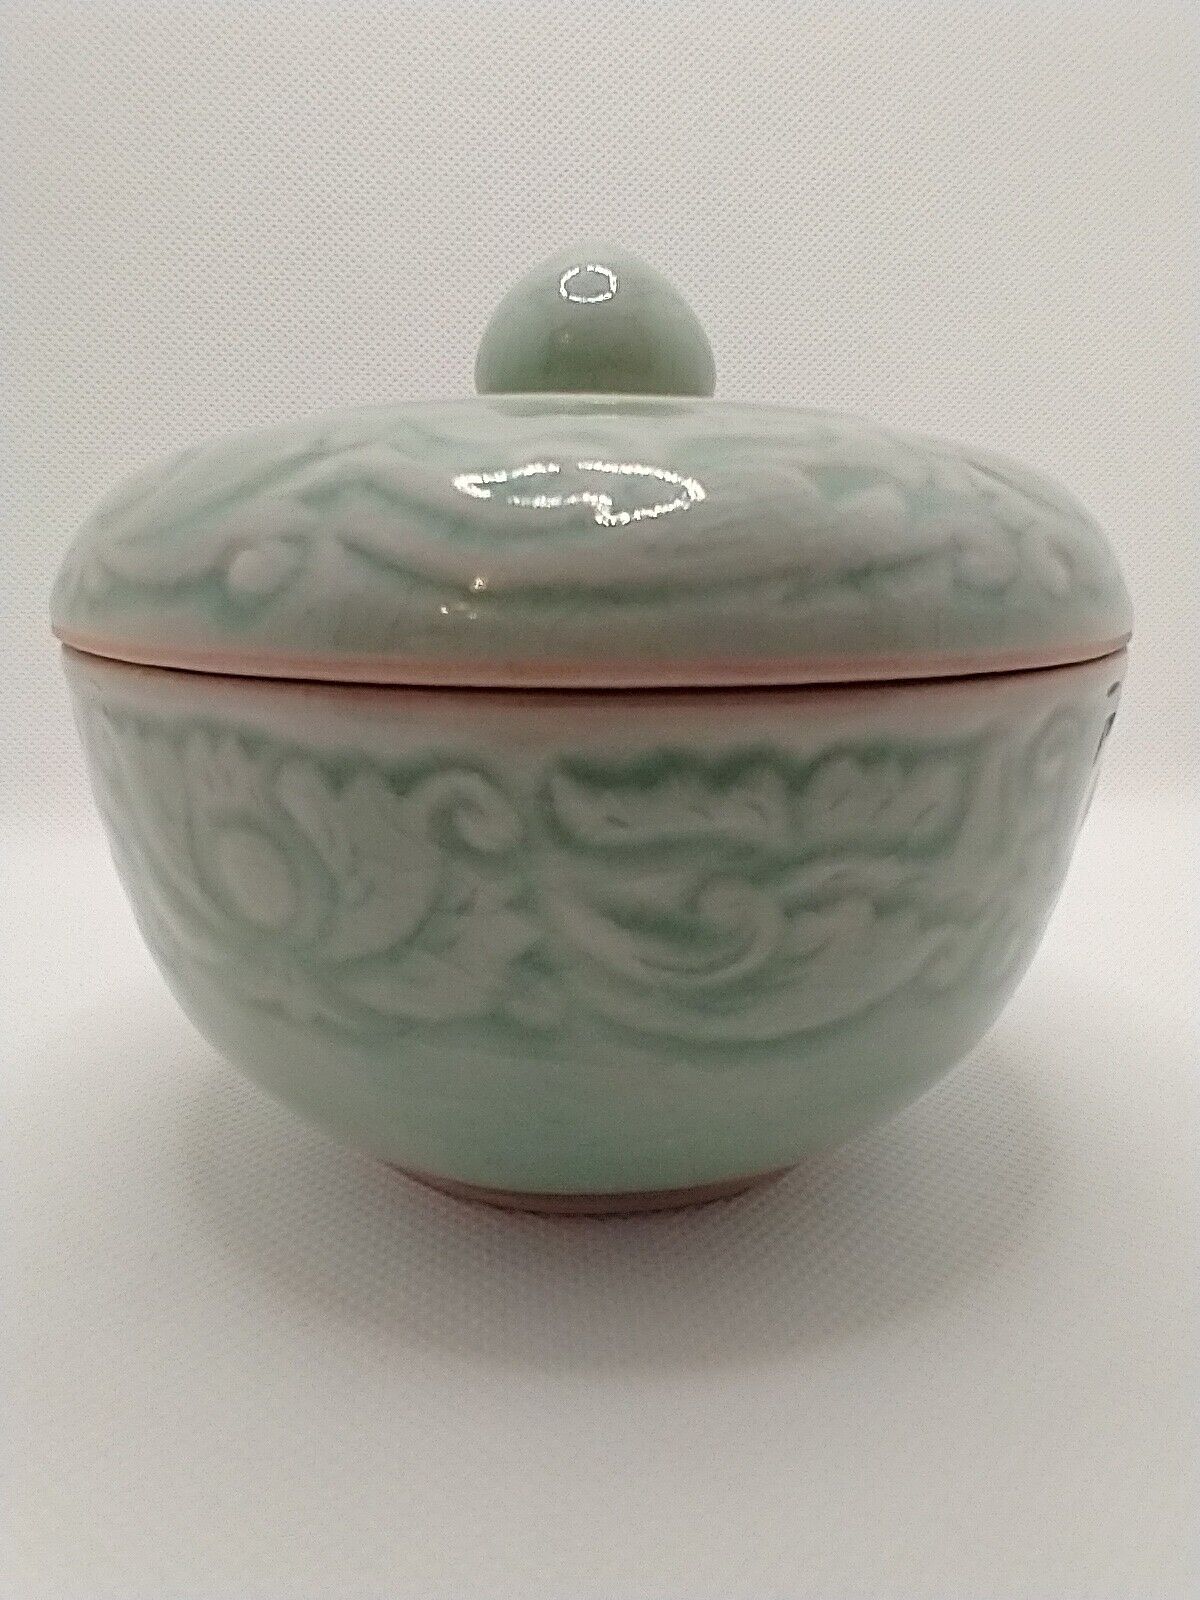 MOTHER\'S DAY VINTAGE AUTHENTIC BAAN CELADON THAILAND RICE BOWL GREEN 4.5x4.25